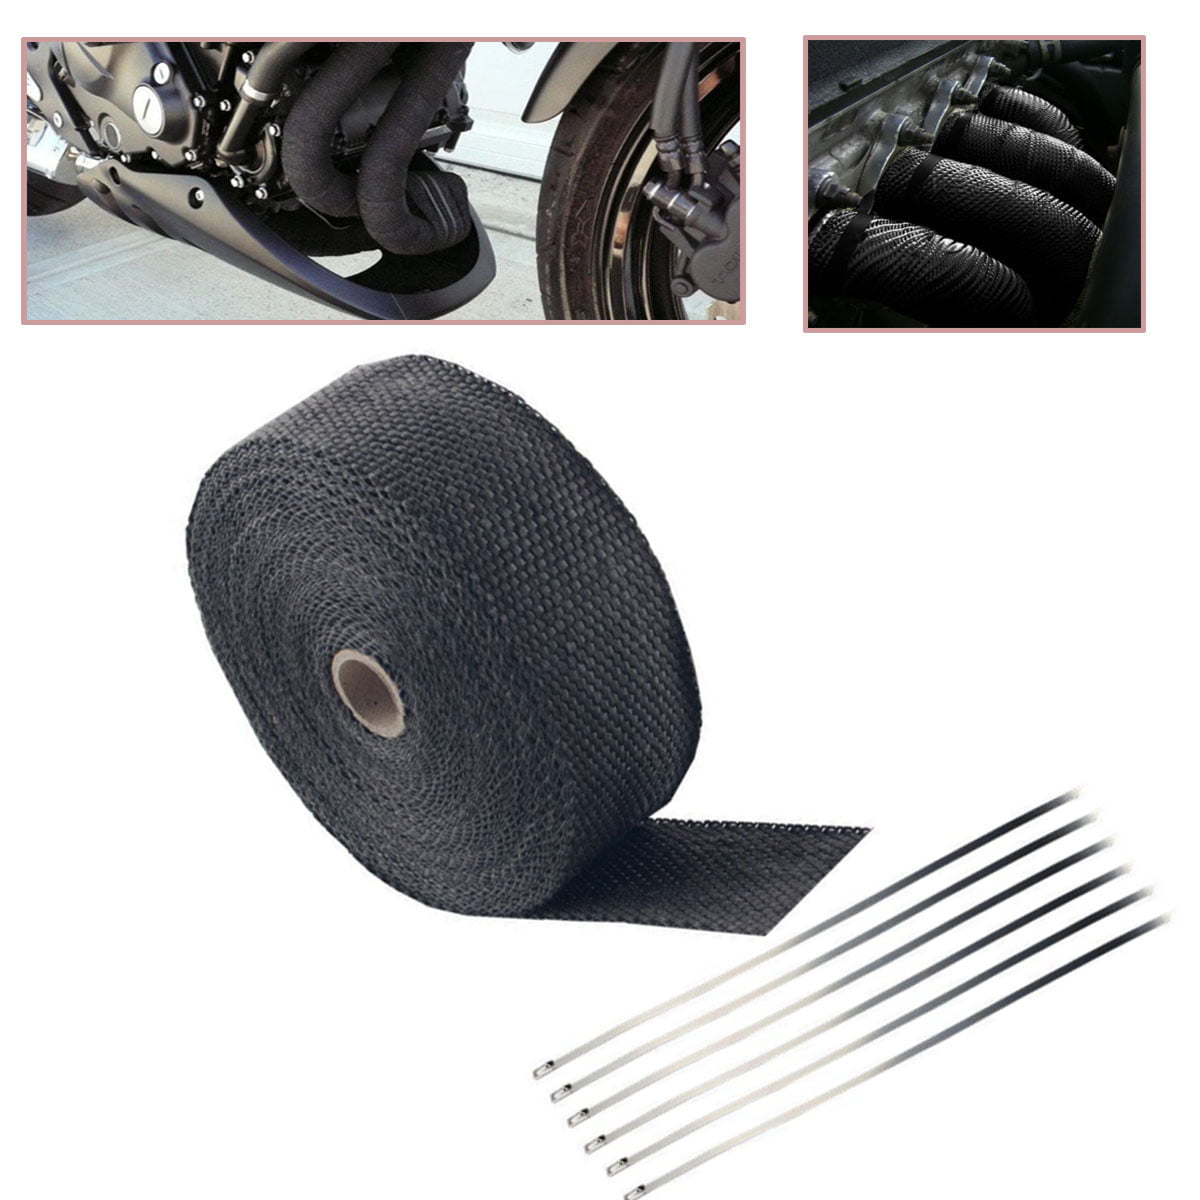 HEAT WRAP 1 MTR HIGH TEMP INSULATING TAPE DOWNPIPE TURBO PIPES MANIFOLD RAP BAND 